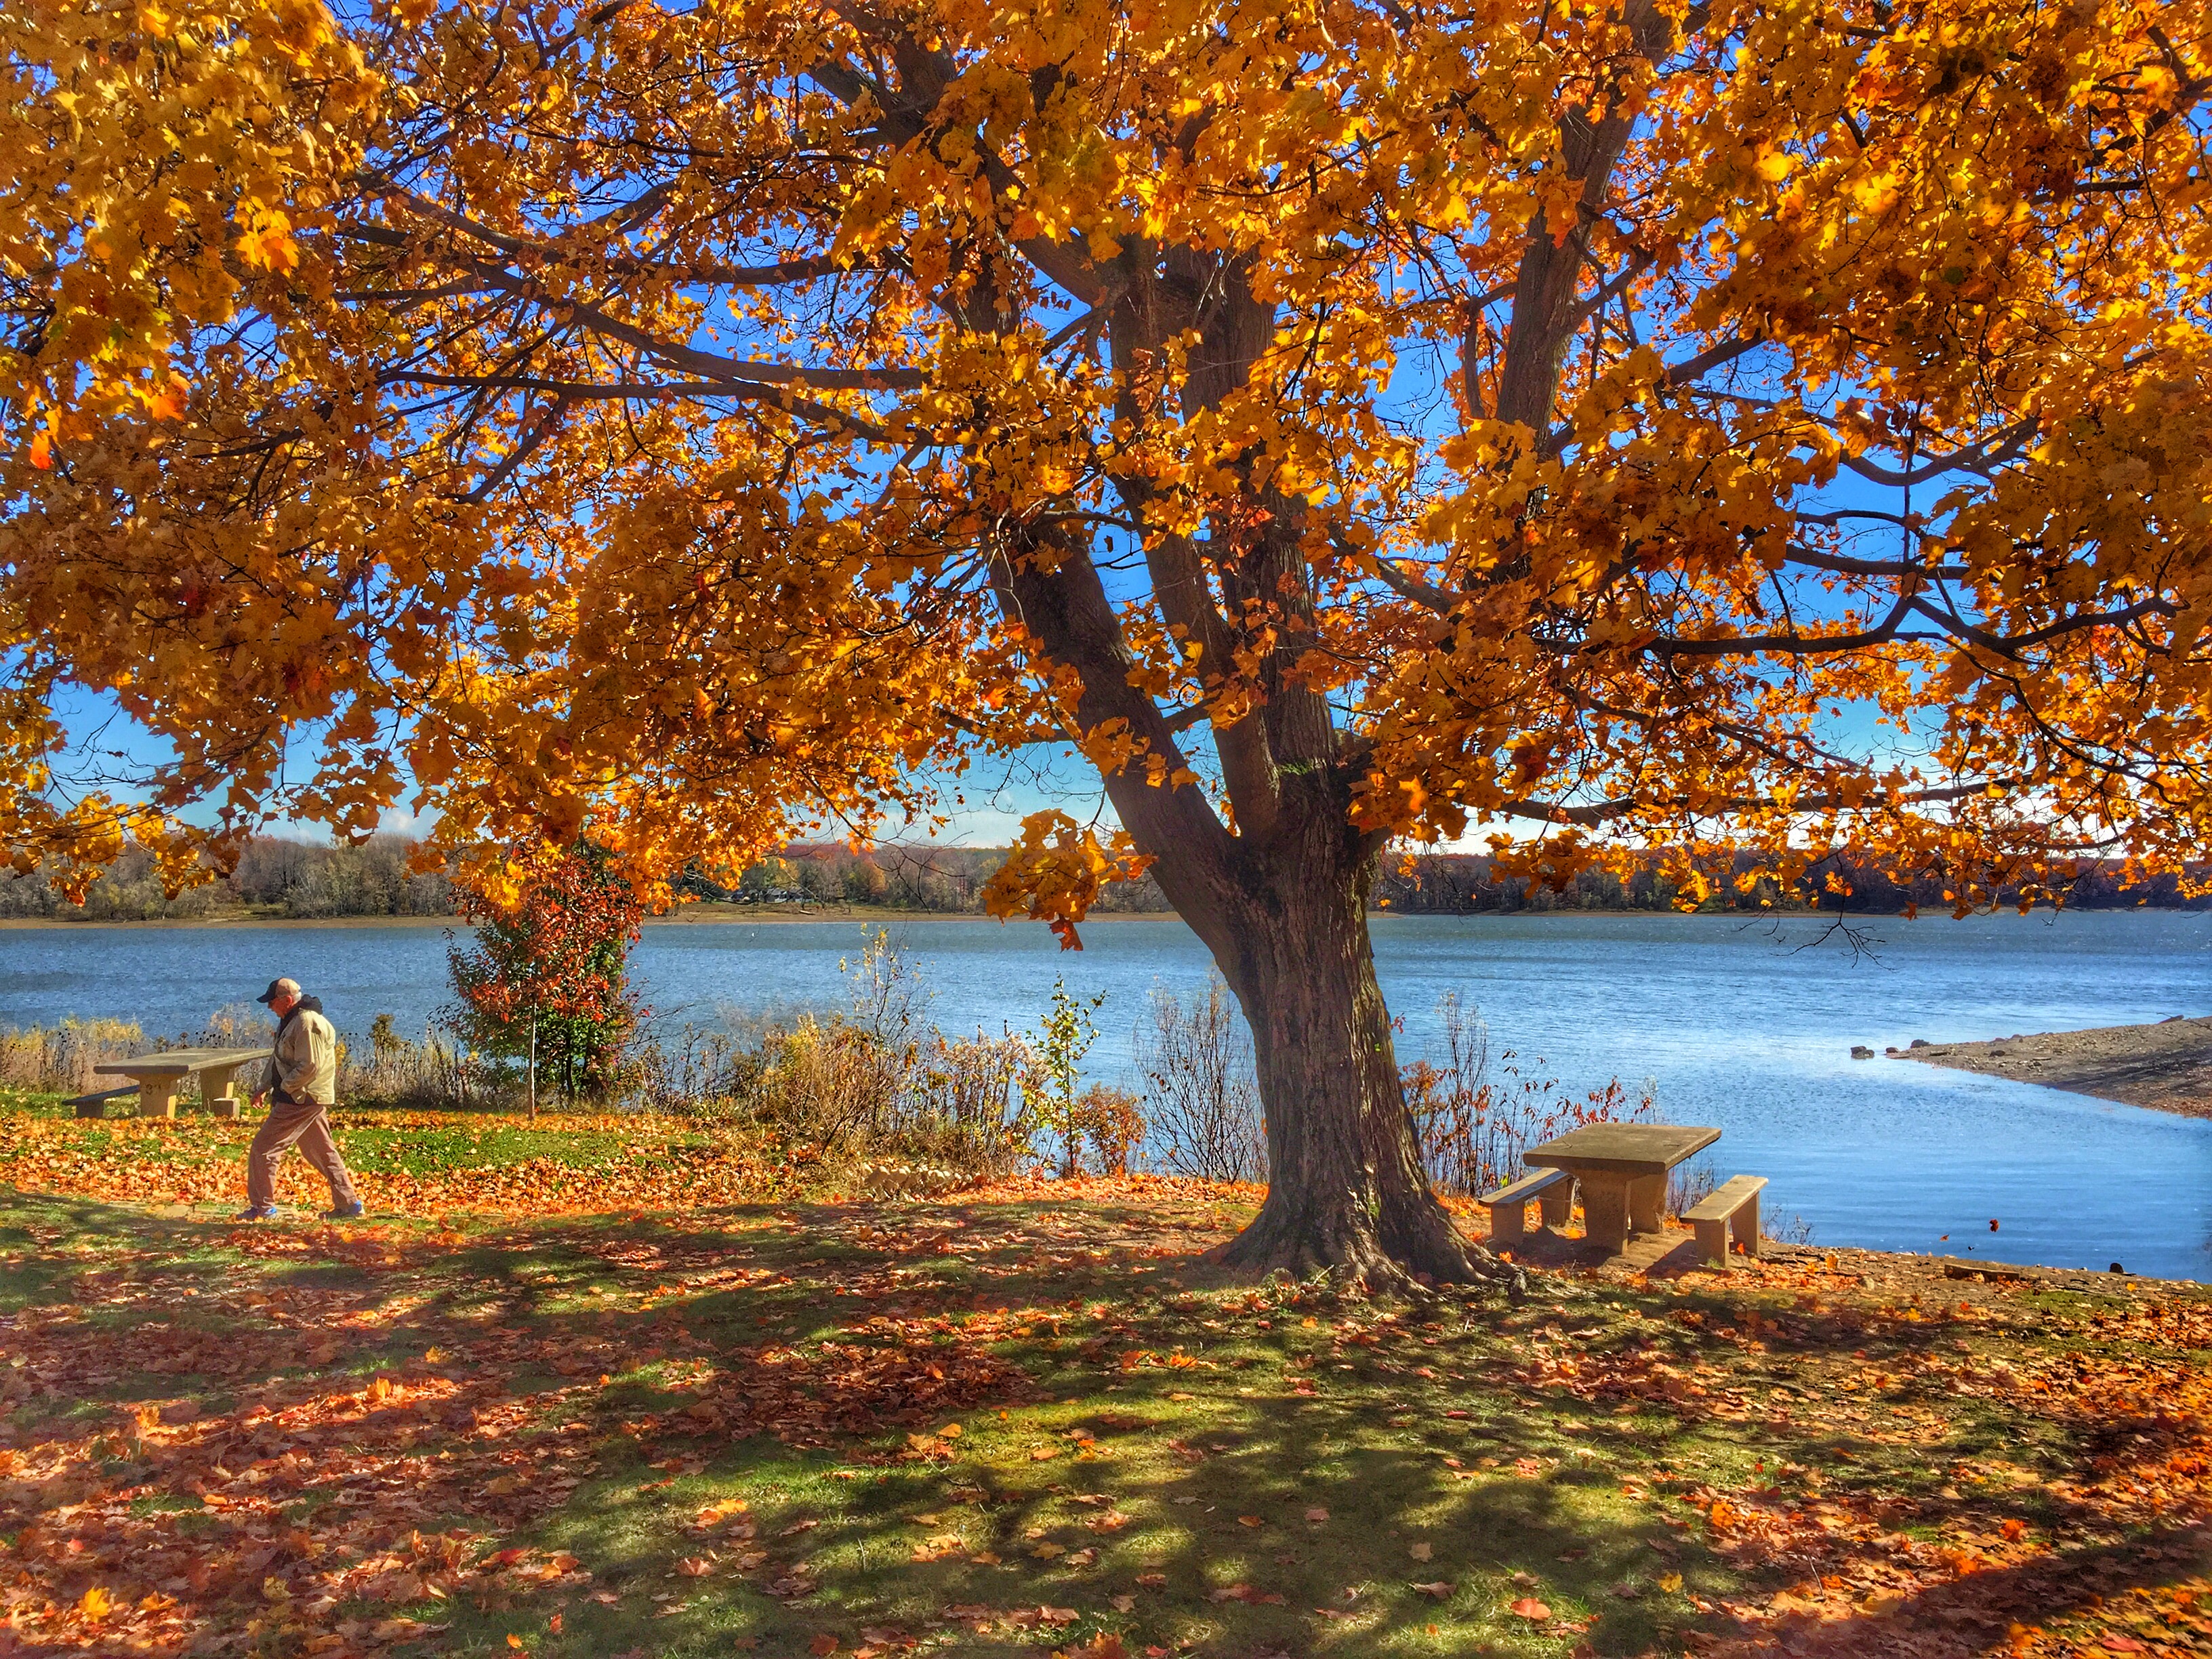 A man walks along the shoreline of Red Bank Park at Hoover Reservoir under the golden colors of a maple tree in the park. My Final Photo for Oct. 29, 2015.